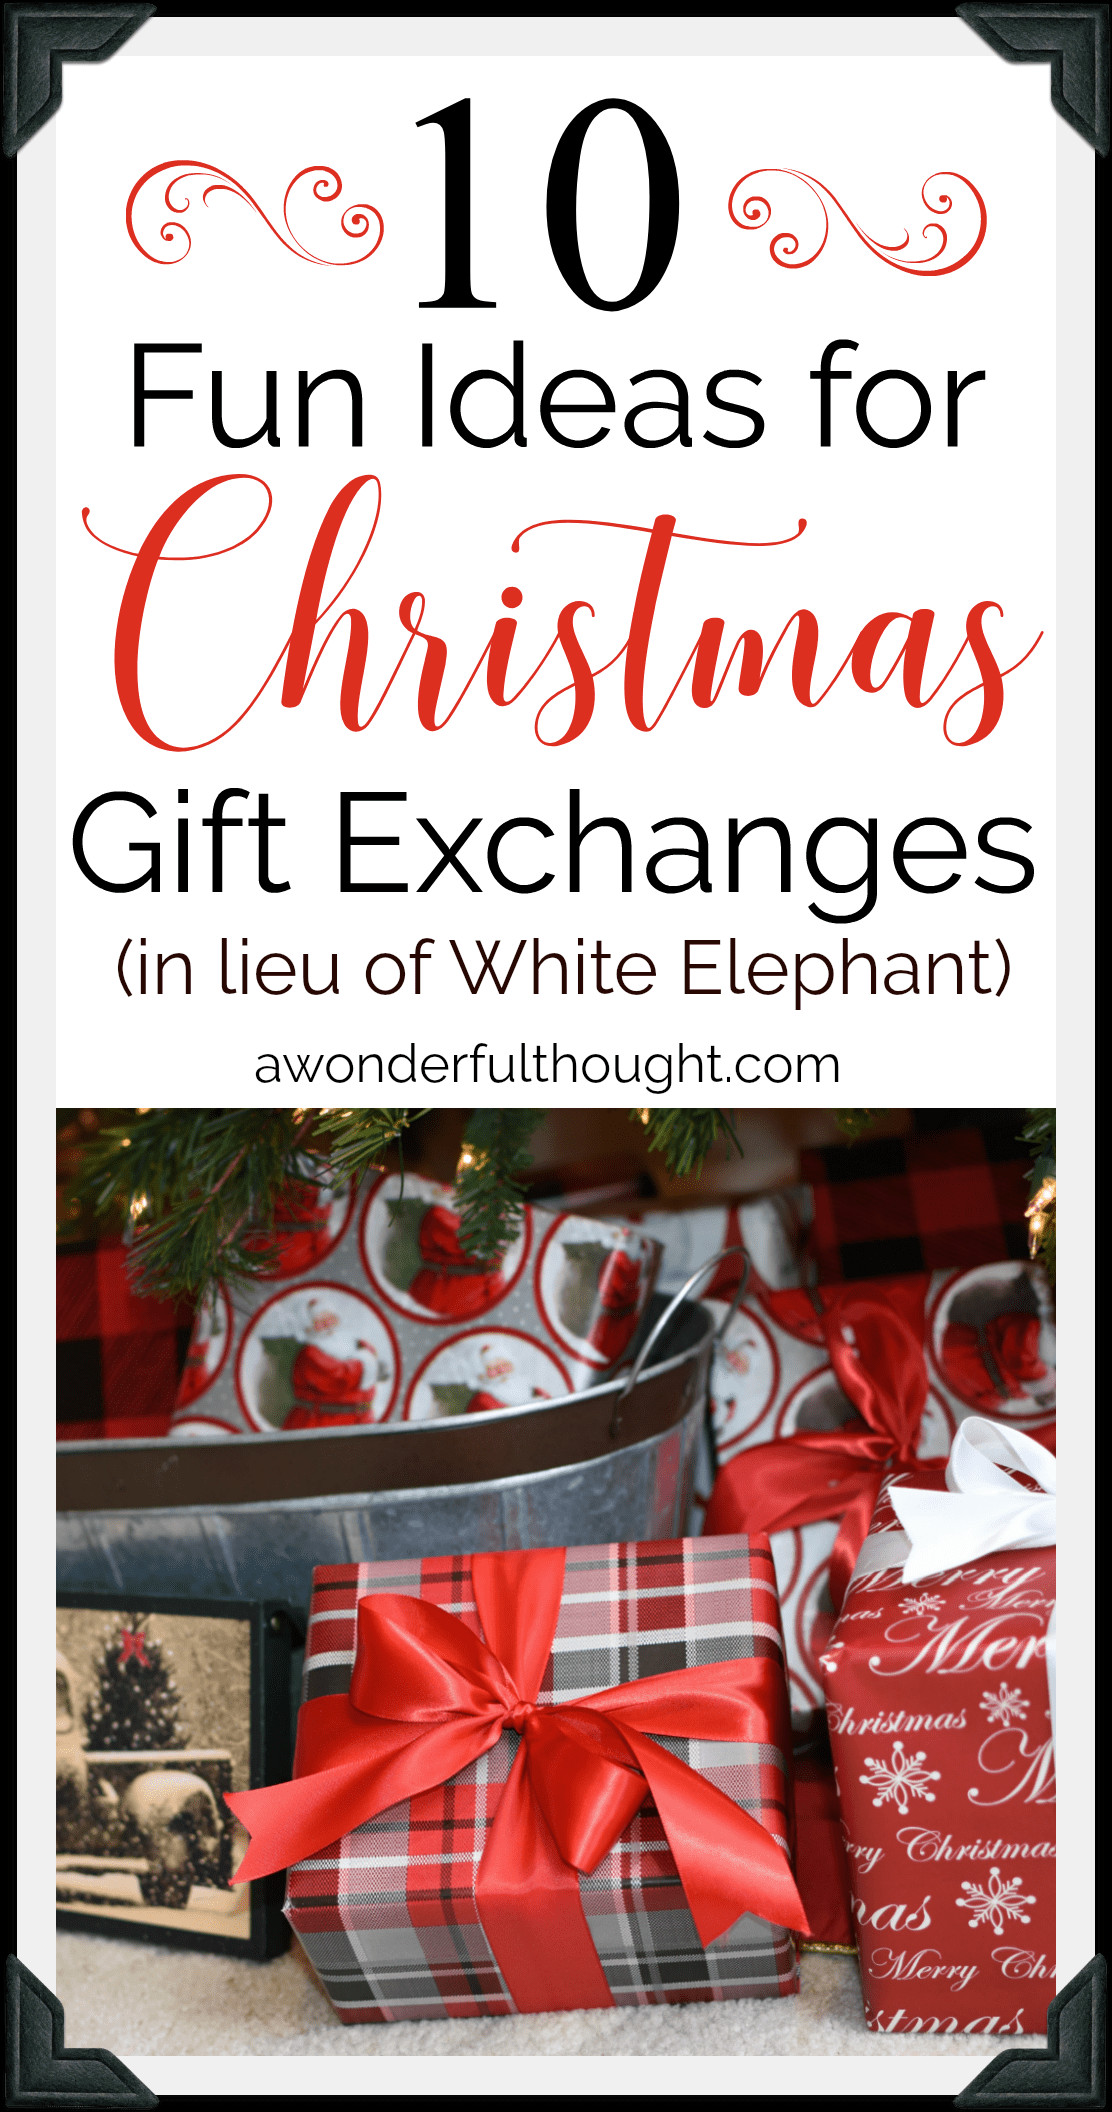 Christmas Gift Exchange Ideas For Coworkers
 Christmas Gift Exchange Ideas A Wonderful Thought